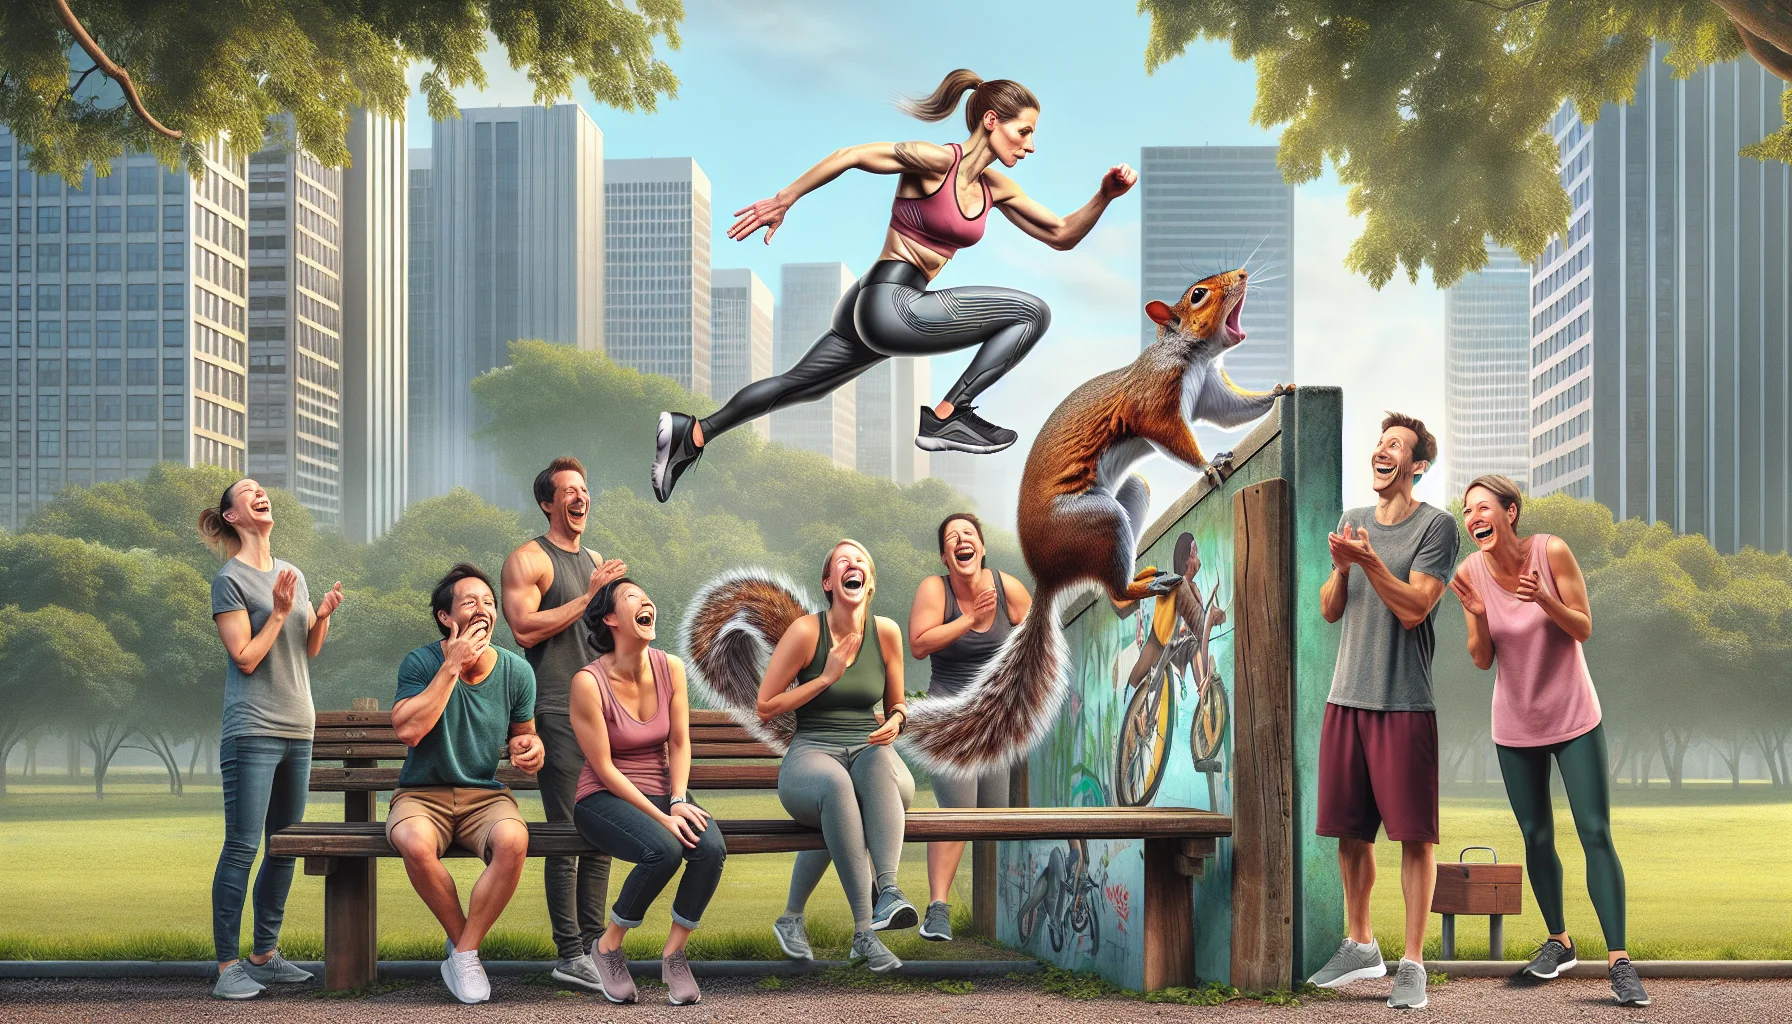 Design a humorous and captivating scene that emphasizes the pleasure of exercise, taking place in an urban park. Conceptualize parkour practitioners showcasing their impressive skills amidst realistic challenges. One of them is a Caucasian woman displaying a stoic countenance, effortlessly leaping over obstacles while several onlookers laugh heartily at something adjacent to the main action, perhaps a squirrel attempting to mimic the athletic maneuvers. The goal of this artwork is to highlight the intrinsic fun in physical fitness and inspire viewers to engage actively with their environments.